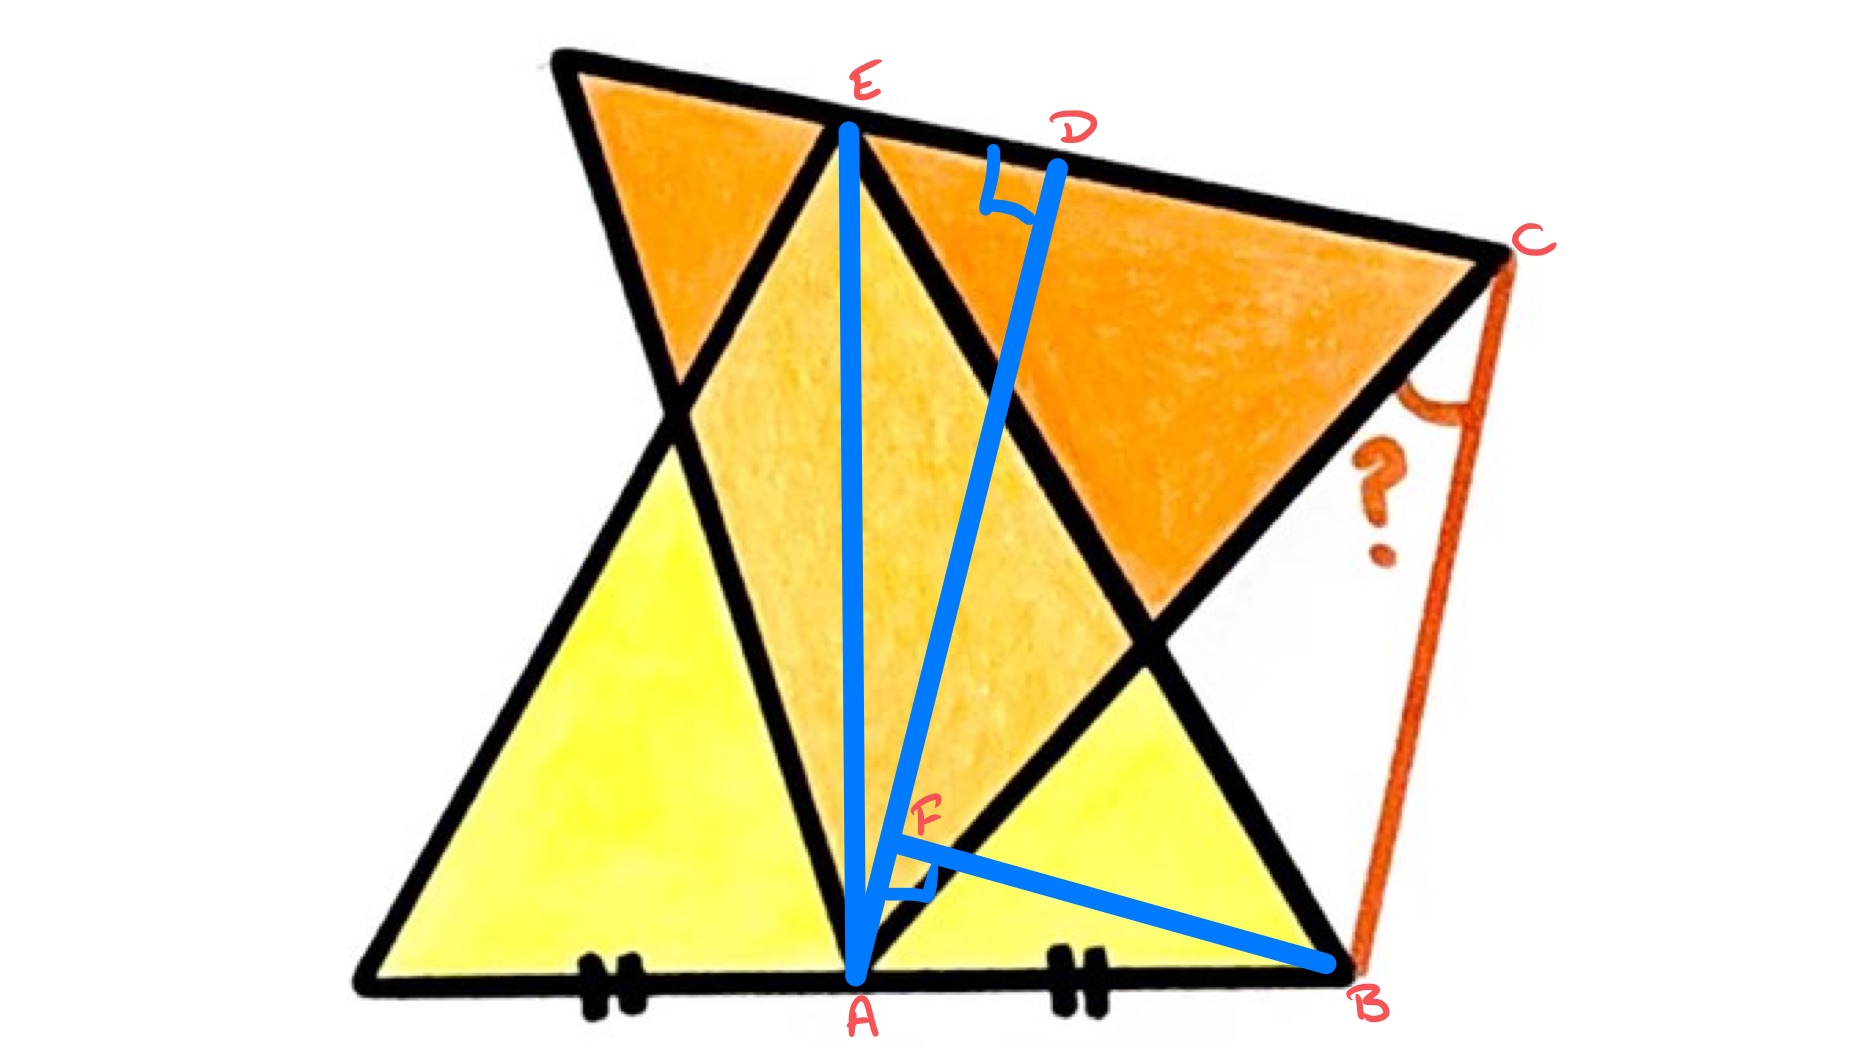 Two overlapping triangles labelled